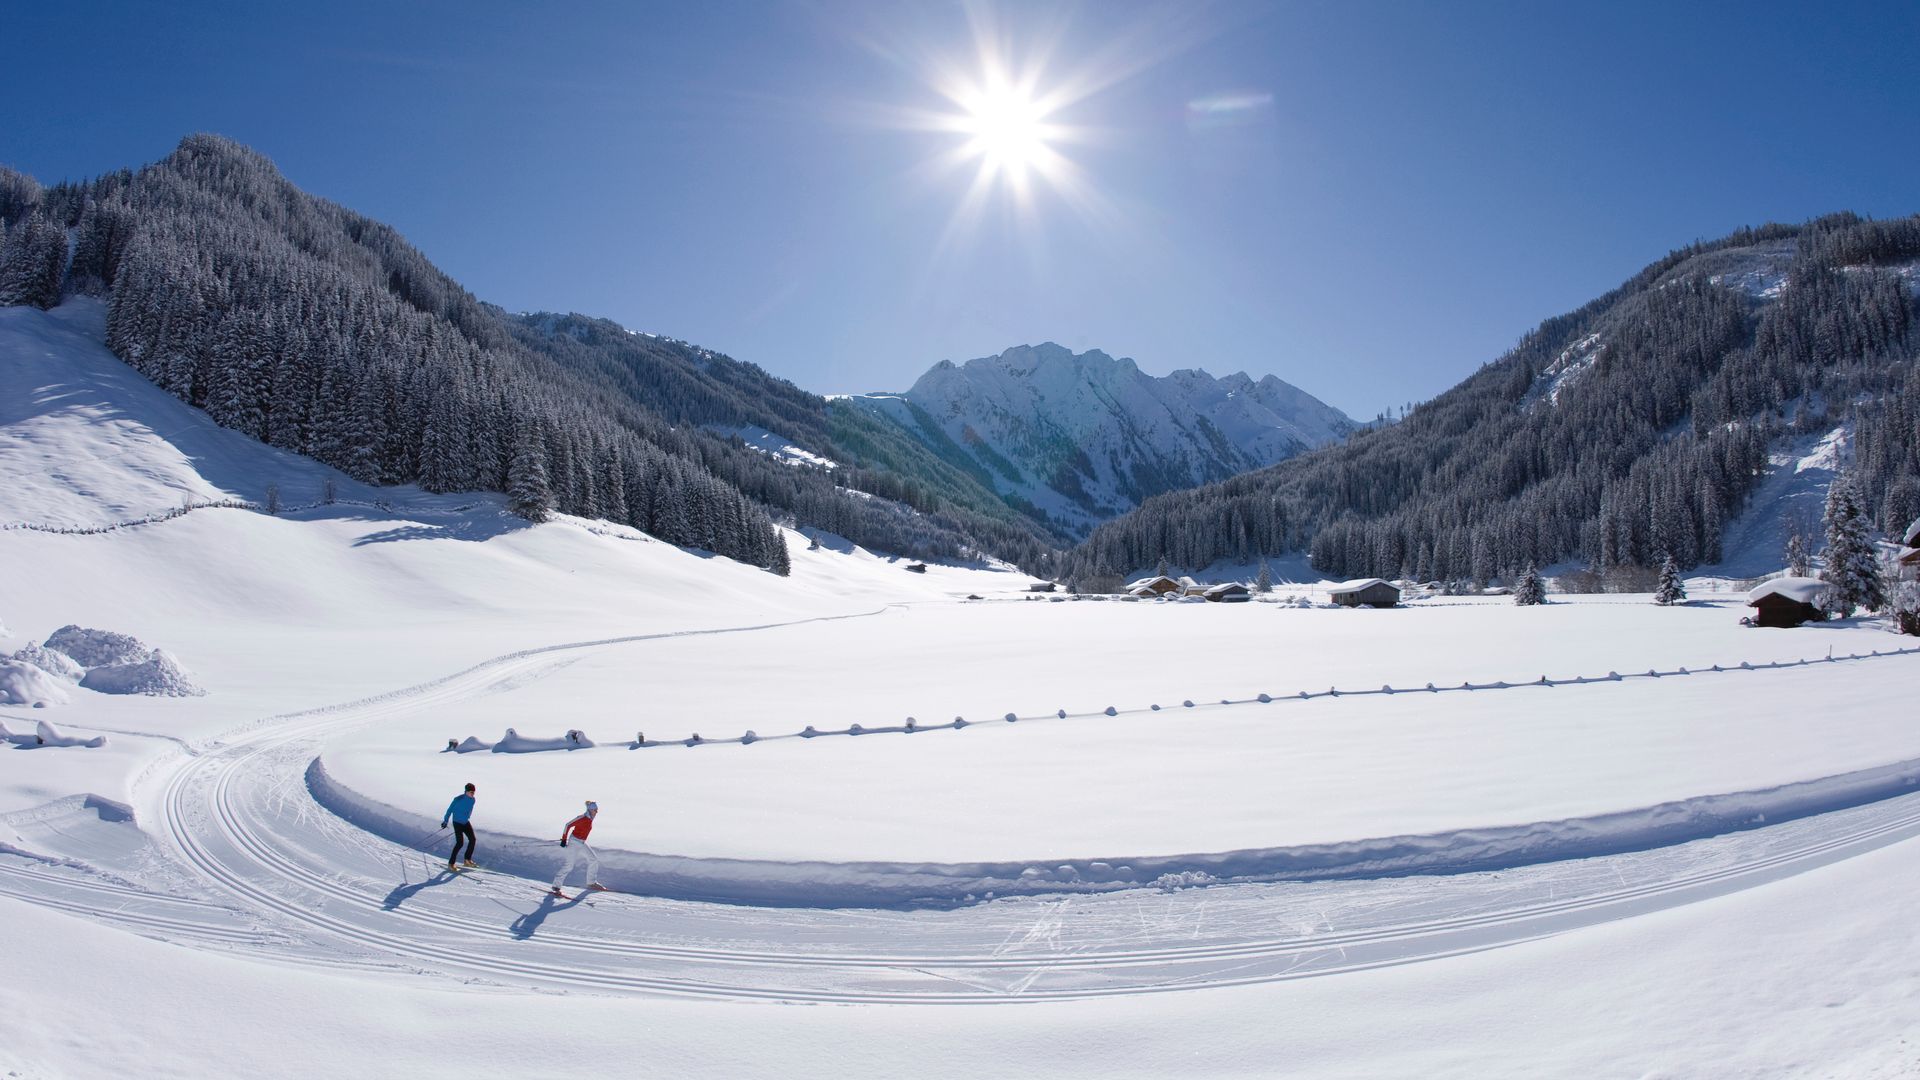 Cross-country skiing on the extensive trails in the Zillertal.